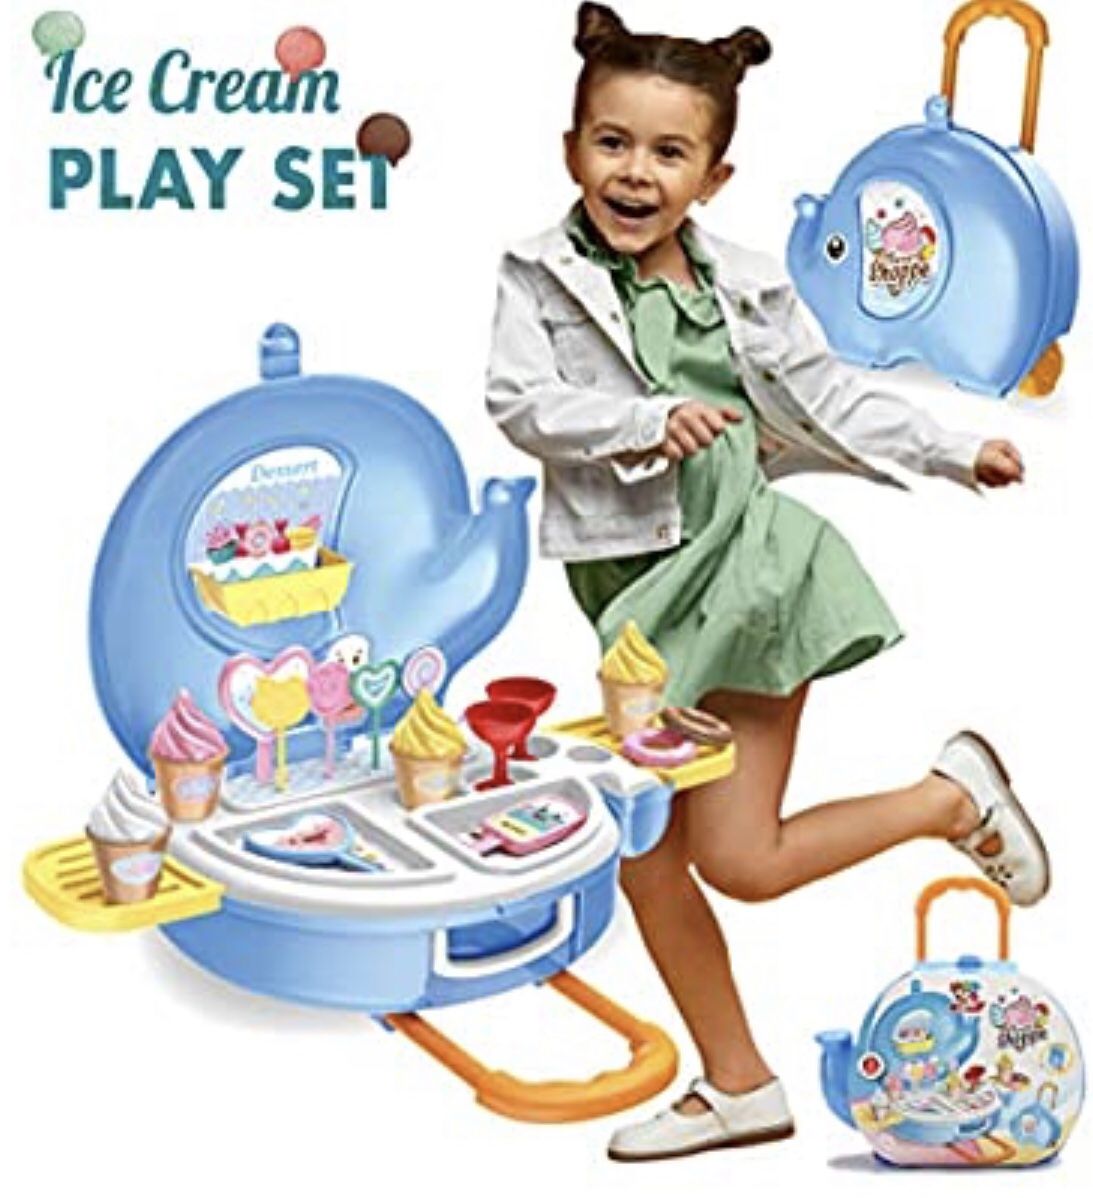 Toys Ice Cream Play Set for Kids - 27pcs Ice Cream Parlor Pretend Play Food Set for Toddlers, Boys & Girls Age 2 3 4 5 +, Ice-Cream Food Trolley Toy